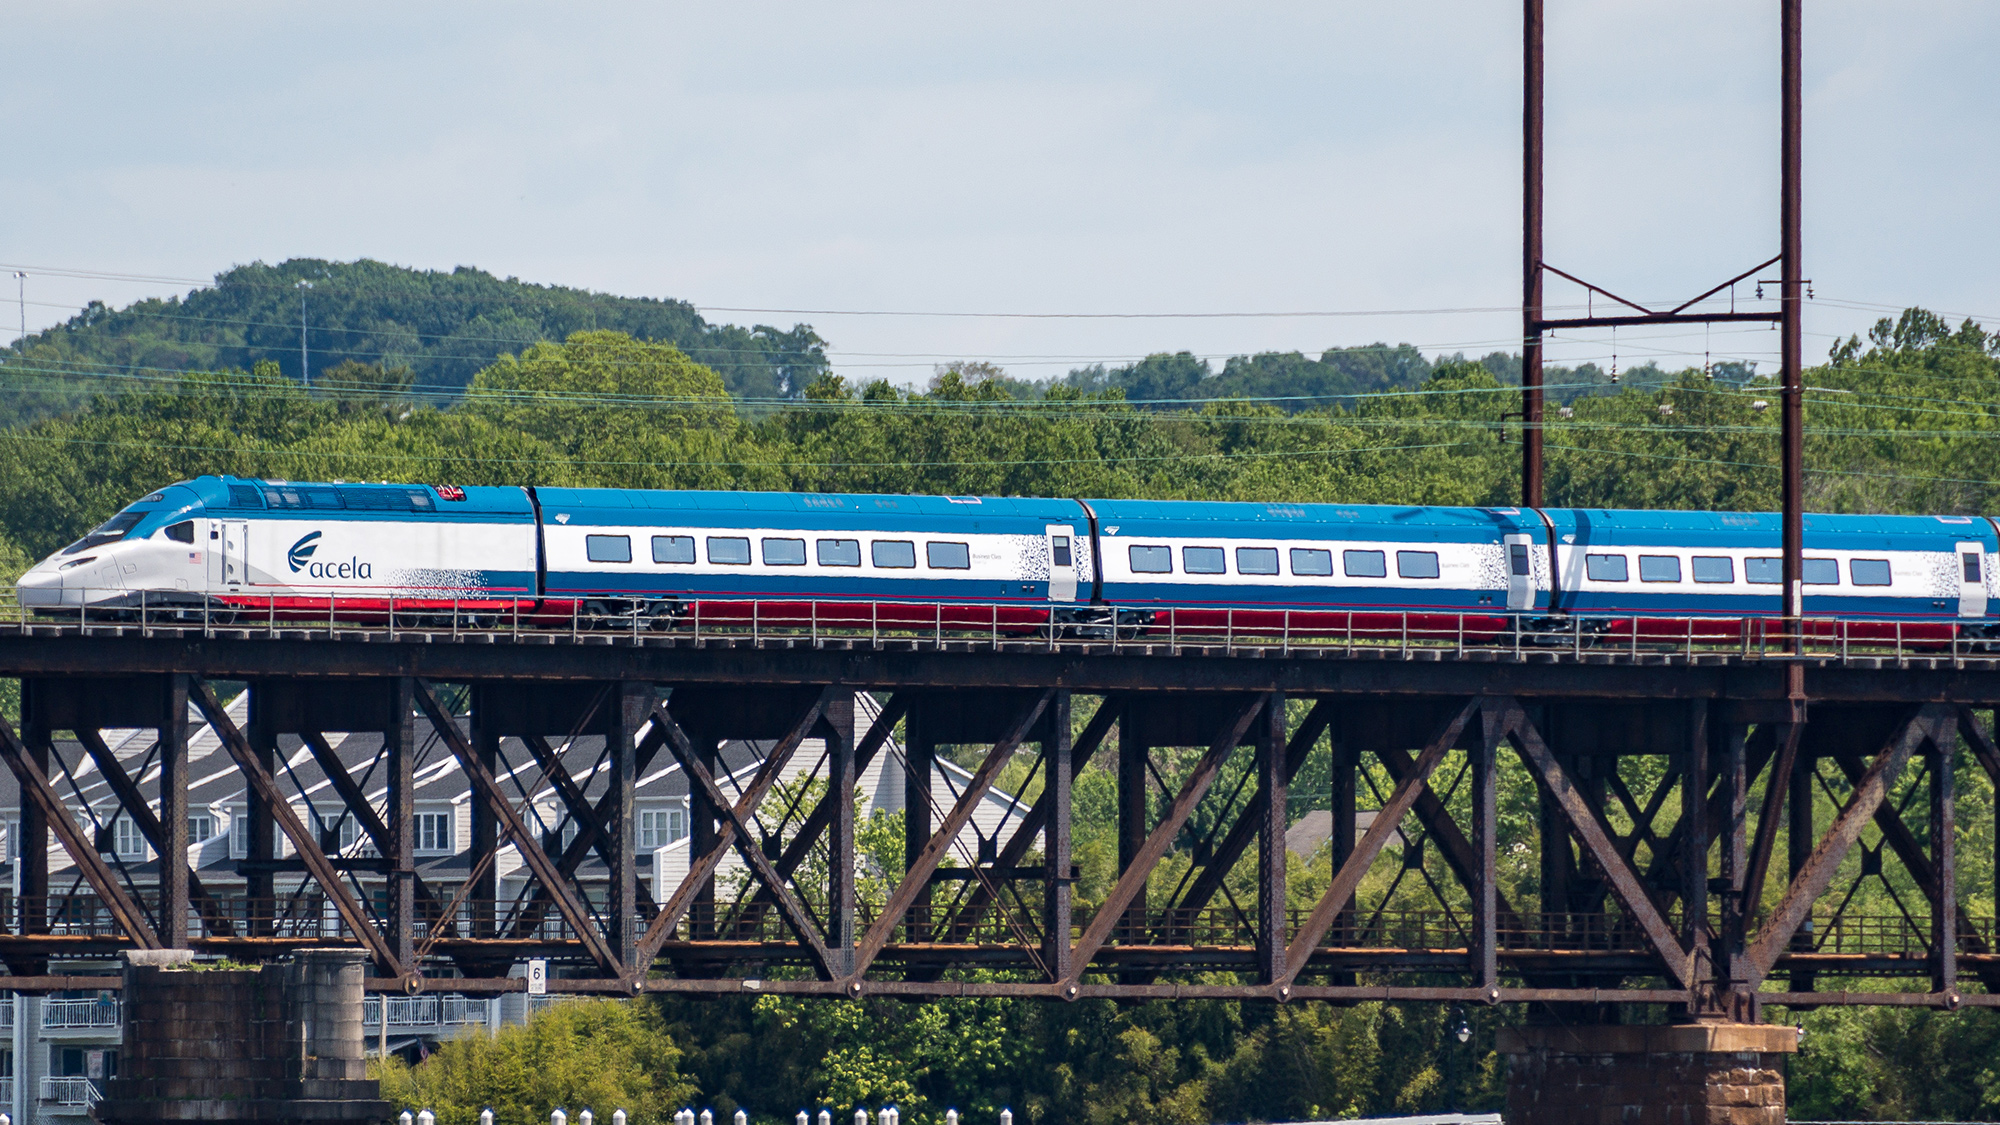 Next Generation Acela Train from the 2010s